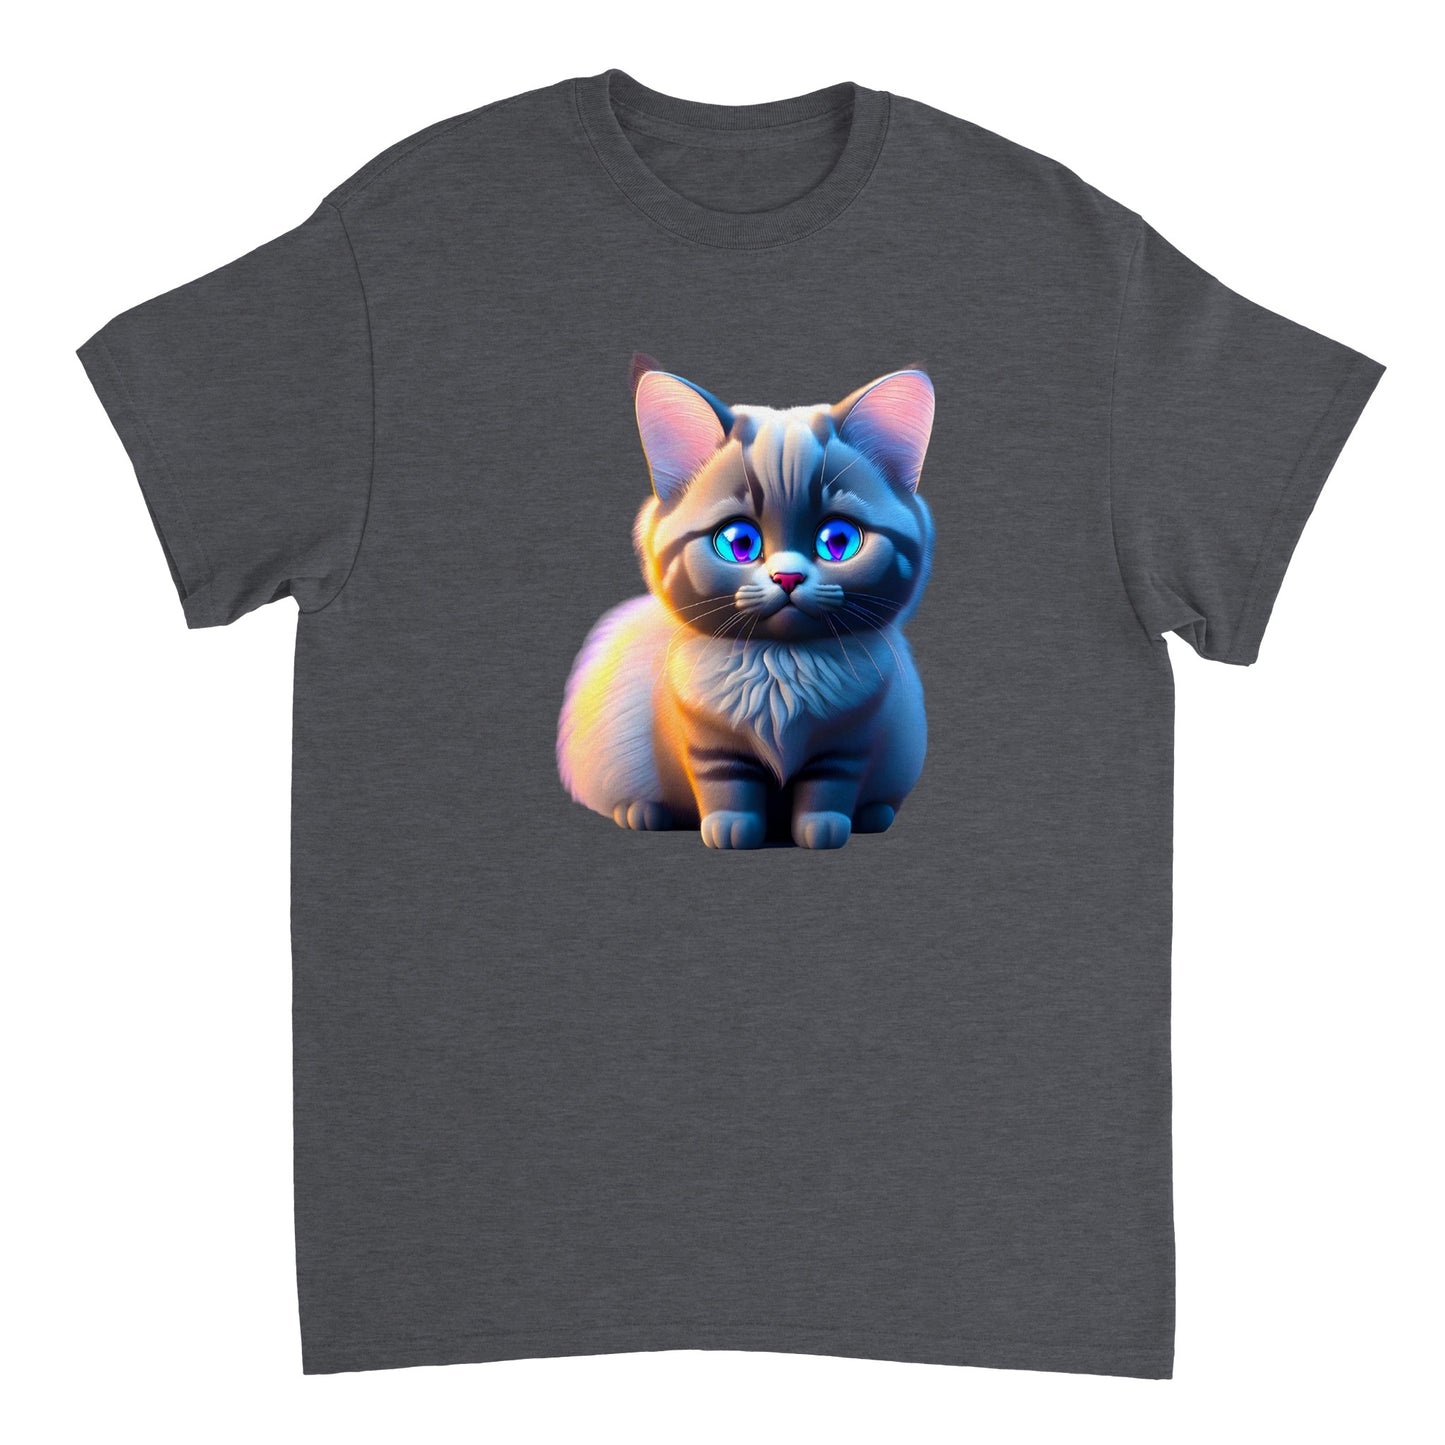 Adorable, Cool, Cute Cats and Kittens Toy - Heavyweight Unisex Crewneck T-shirt 18